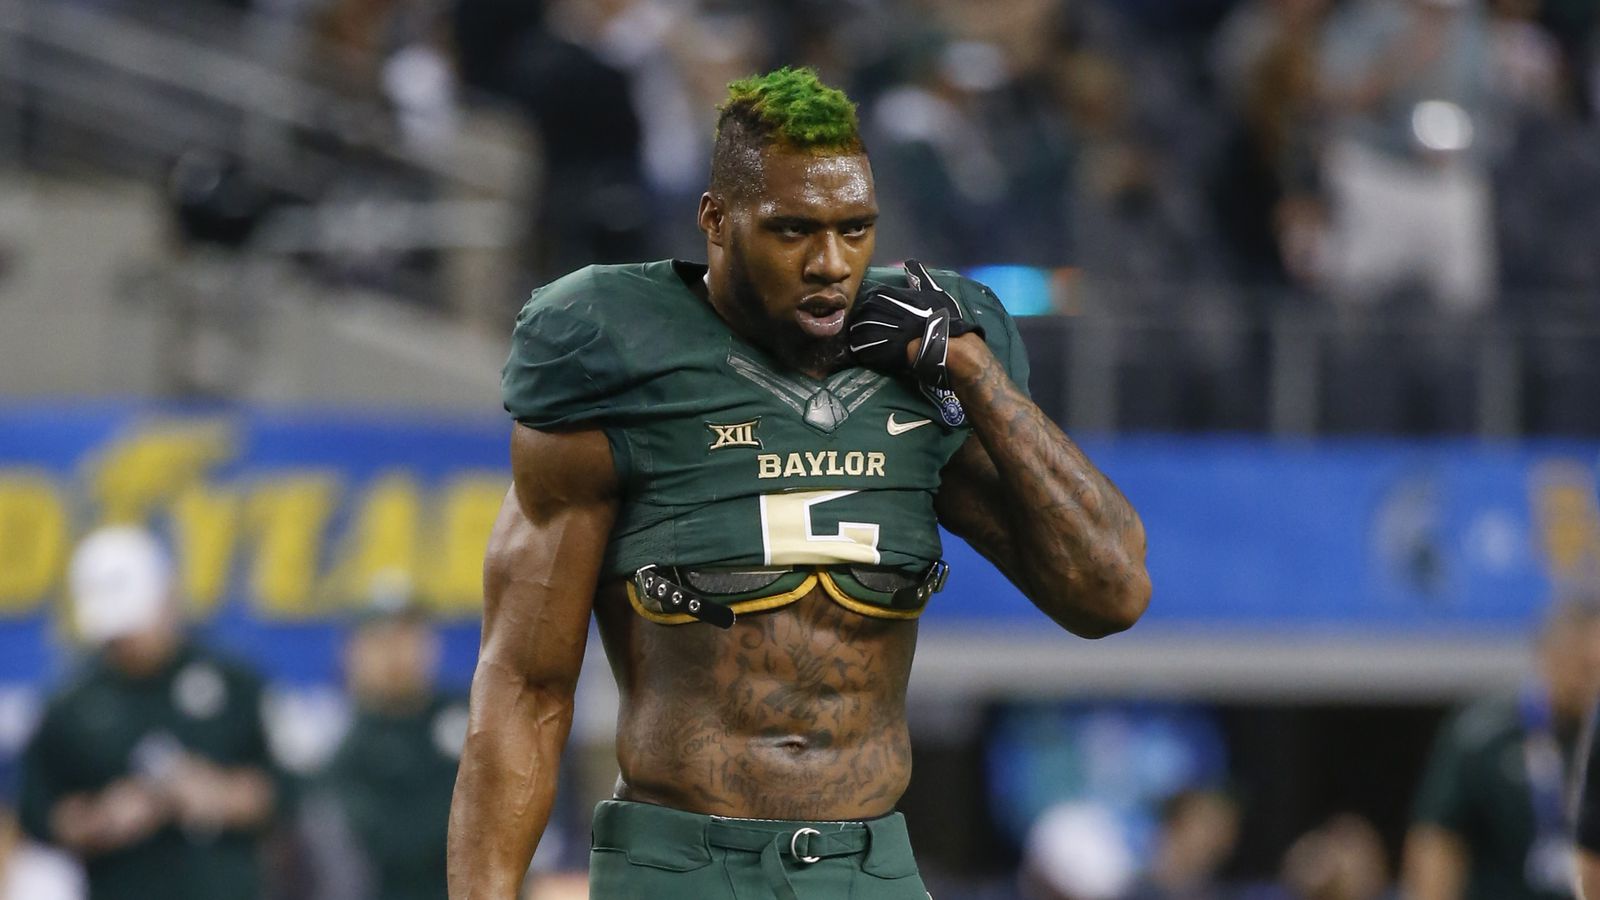 NCAA putting a stop to the Shawn Oakman jersey tuck.